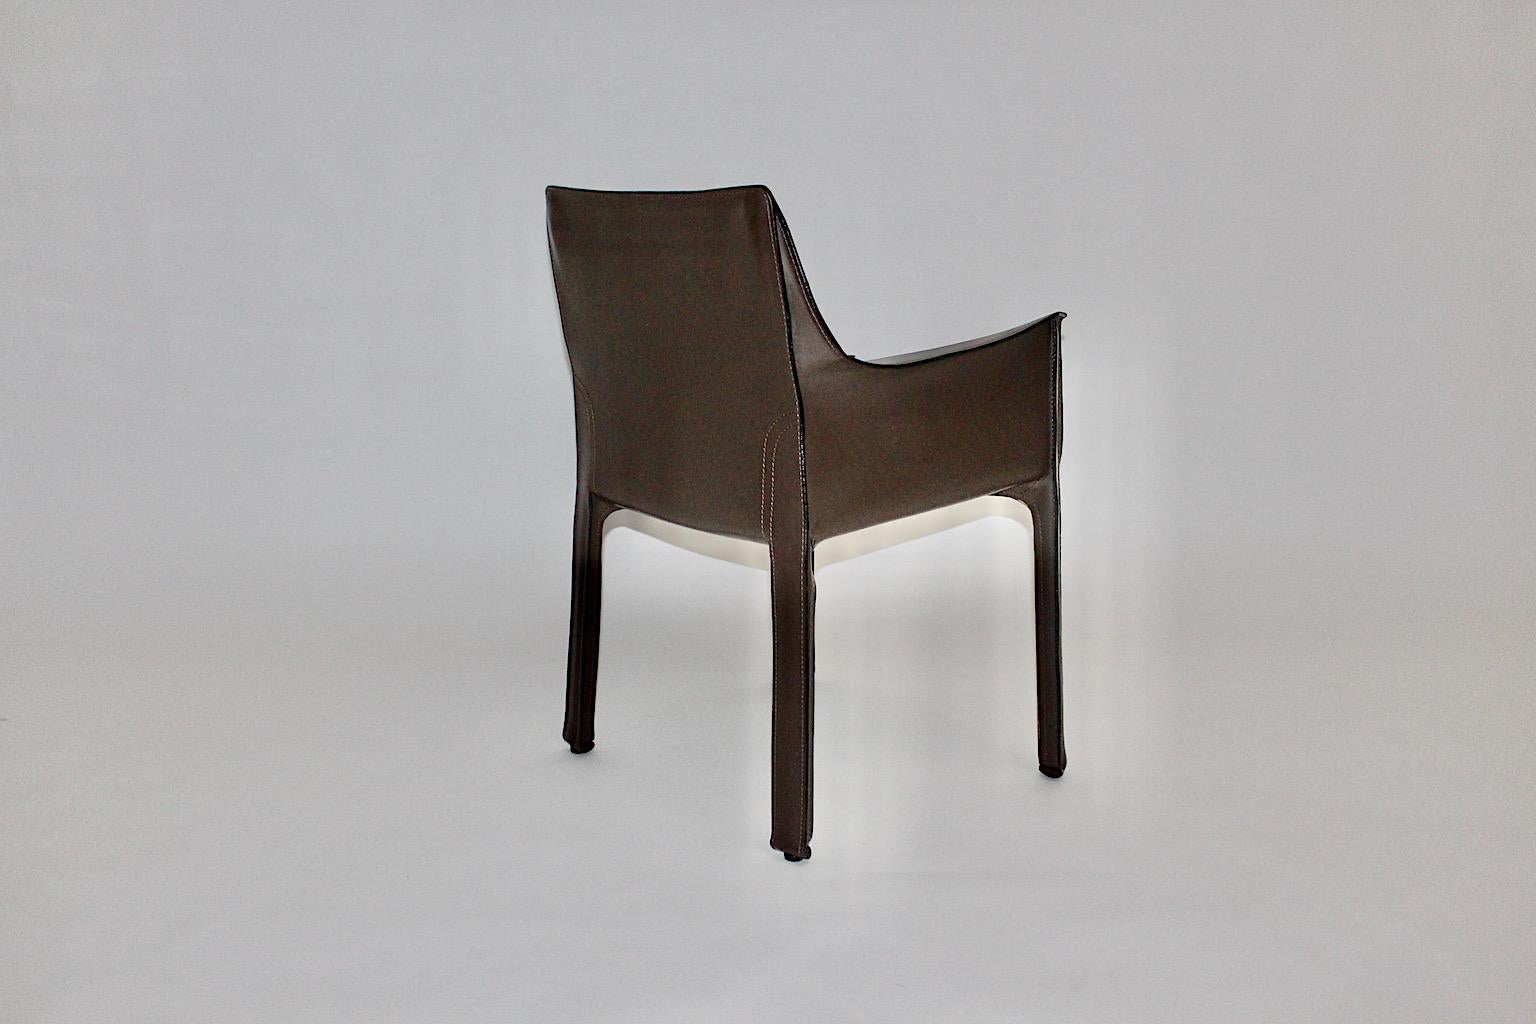 Mario Bellini Vintage Chocolate Brown Leather Dining Chairs Cassina 1970s Italy For Sale 3